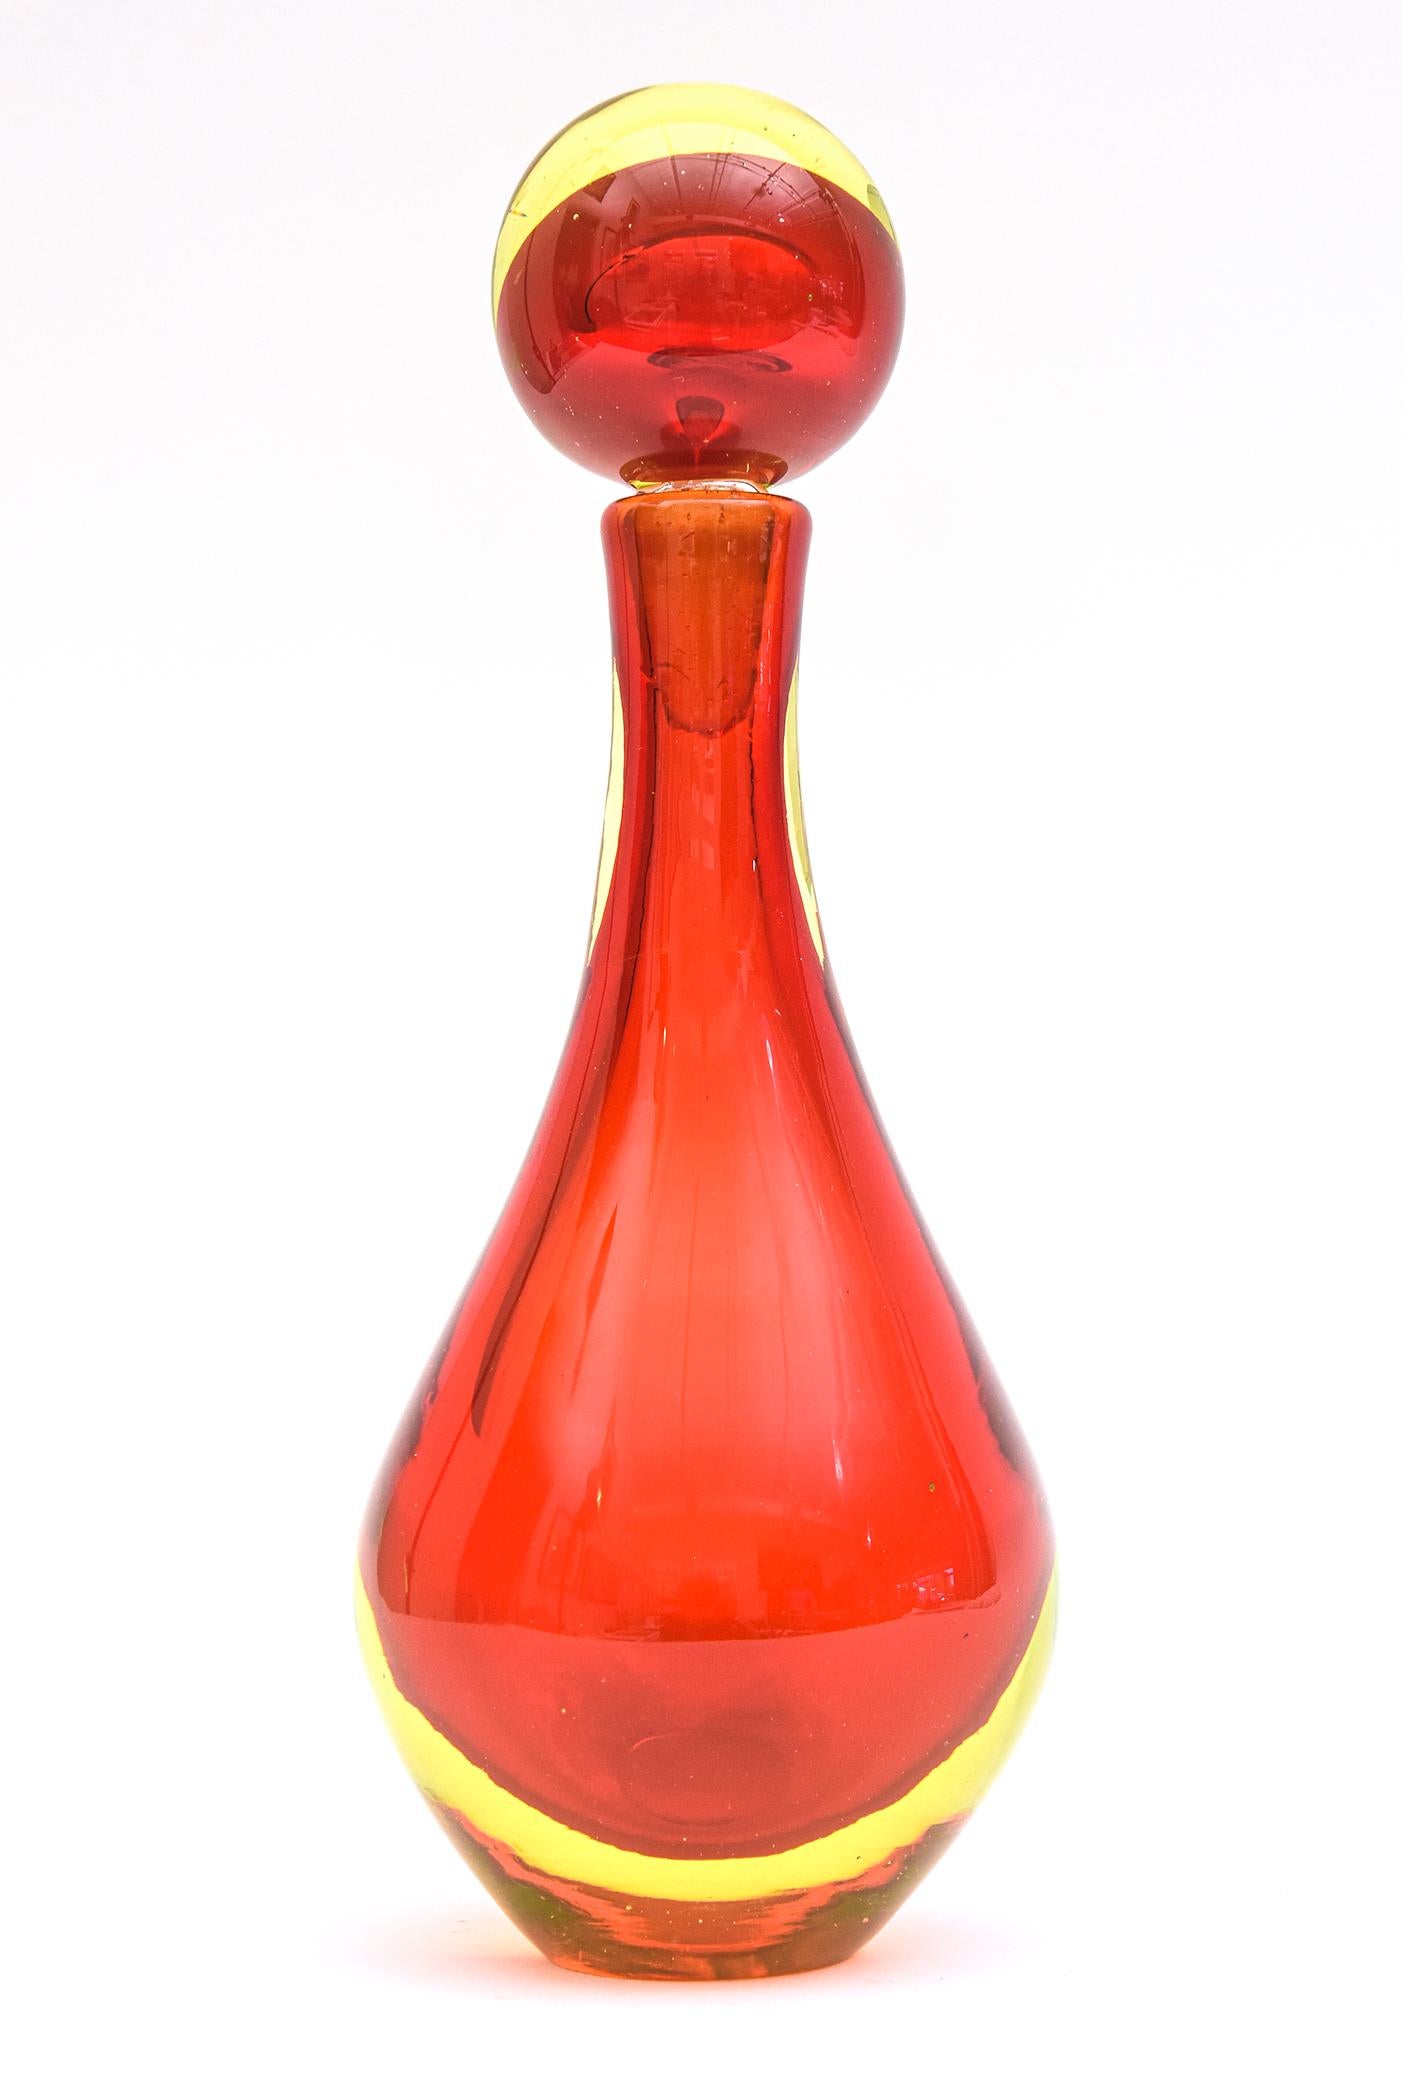 This stunning and brilliant vintage Italian Murano hand blown sommerso decanter or perfume bottle is by Antonio da Ros for Cenedese. It is from the 60's. The colors of red and yellow in sommerso juxtapose each other in great contrast. The bulblous